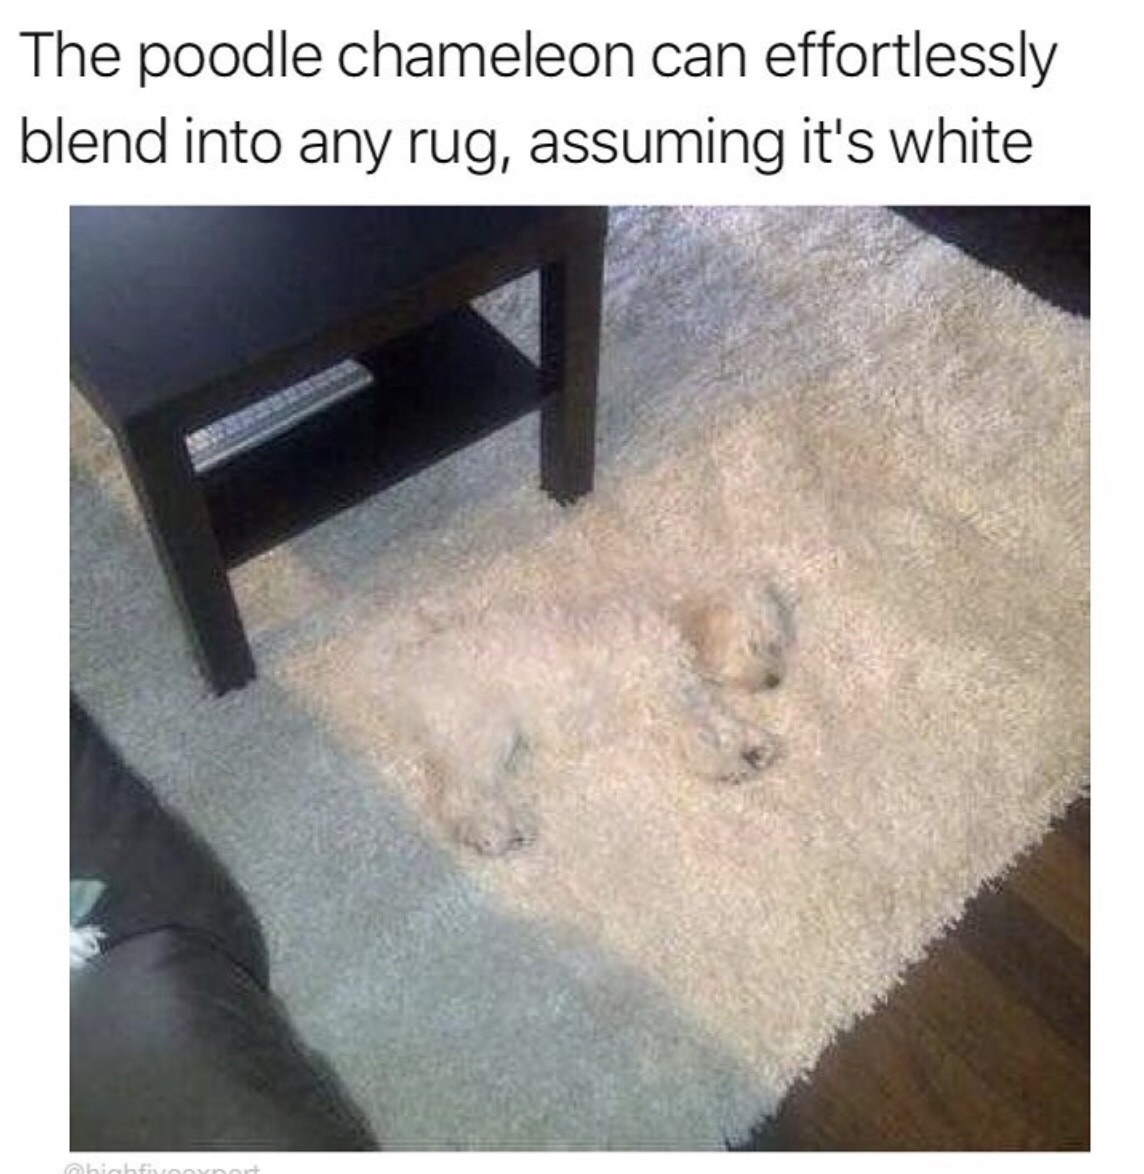 dog blends - The poodle chameleon can effortlessly blend into any rug, assuming it's white hicho